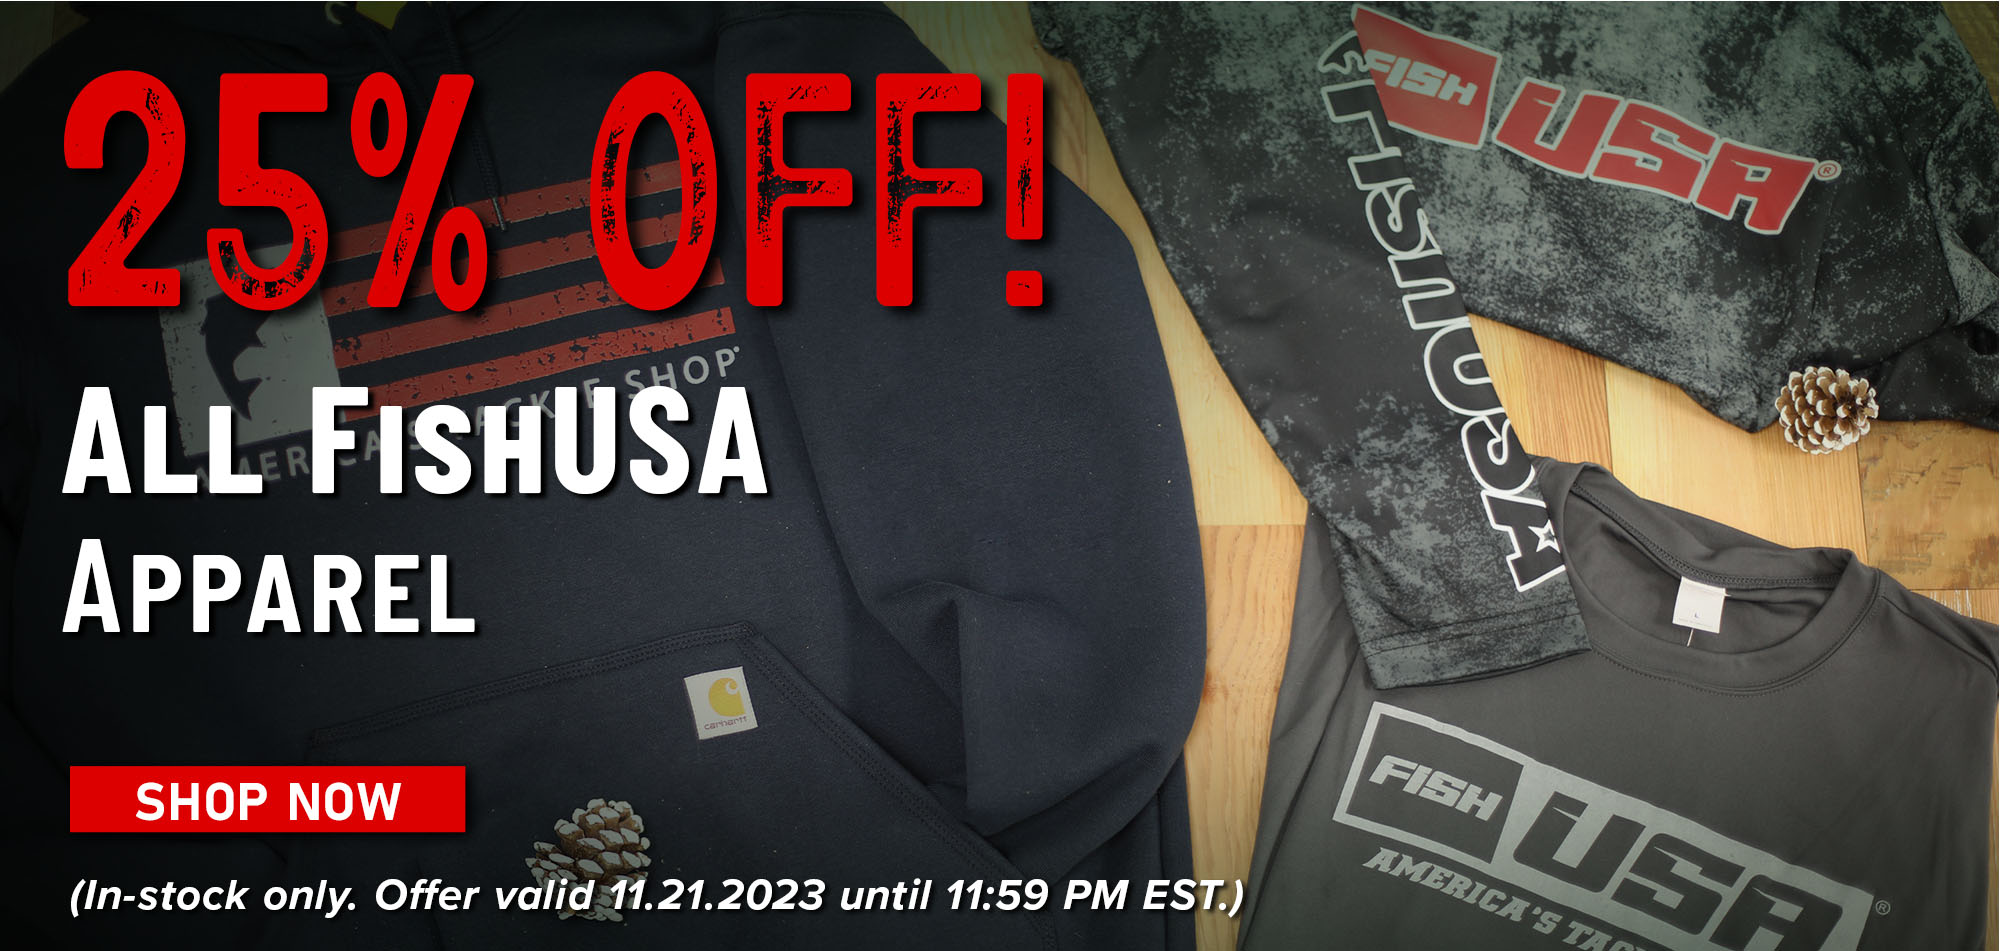 25% Off! All FishUSA Apparel Shop Now (In-stock only. Offer valid 11.21.2023 until 11:59 PM EST.)